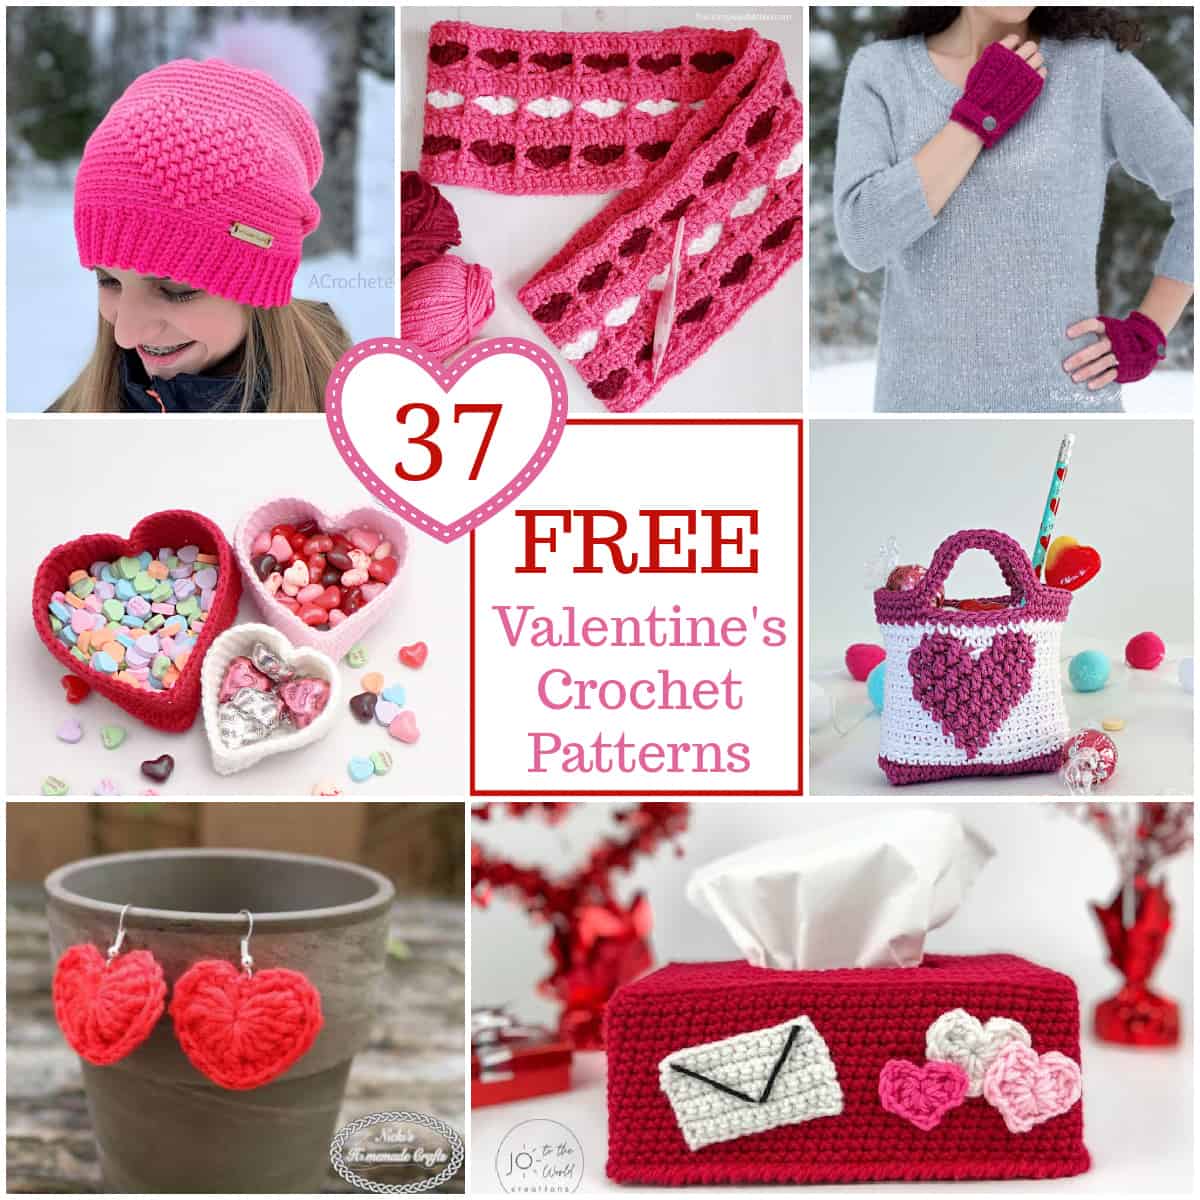 Cable Heart Gift Bag Tutorial - moogly